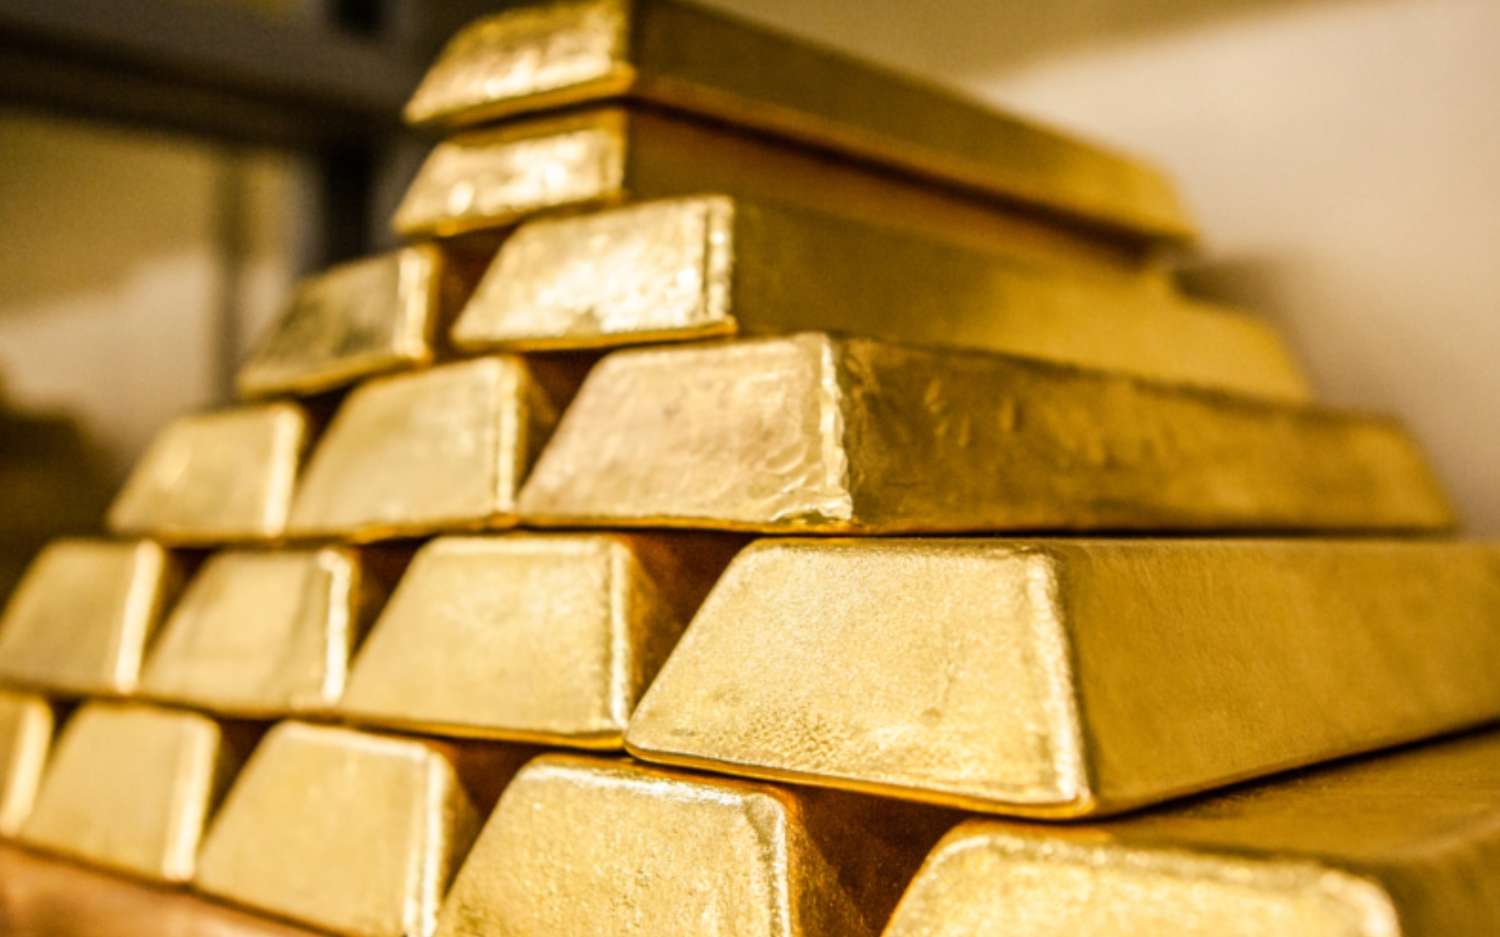 Pertinence of Independent Commission to Probe Gold Confiscated from TIA Premises